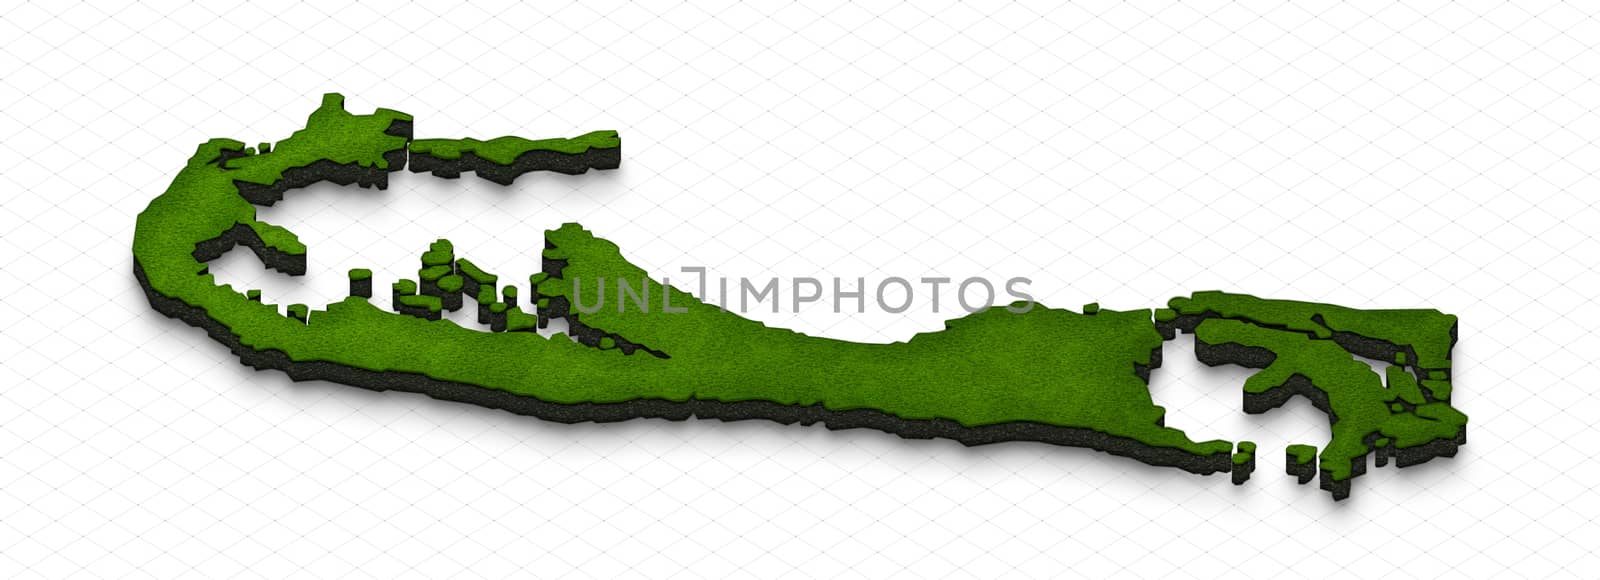 Illustration of a green ground map of Bermuda on grid background. Left 3D isometric perspective projection.